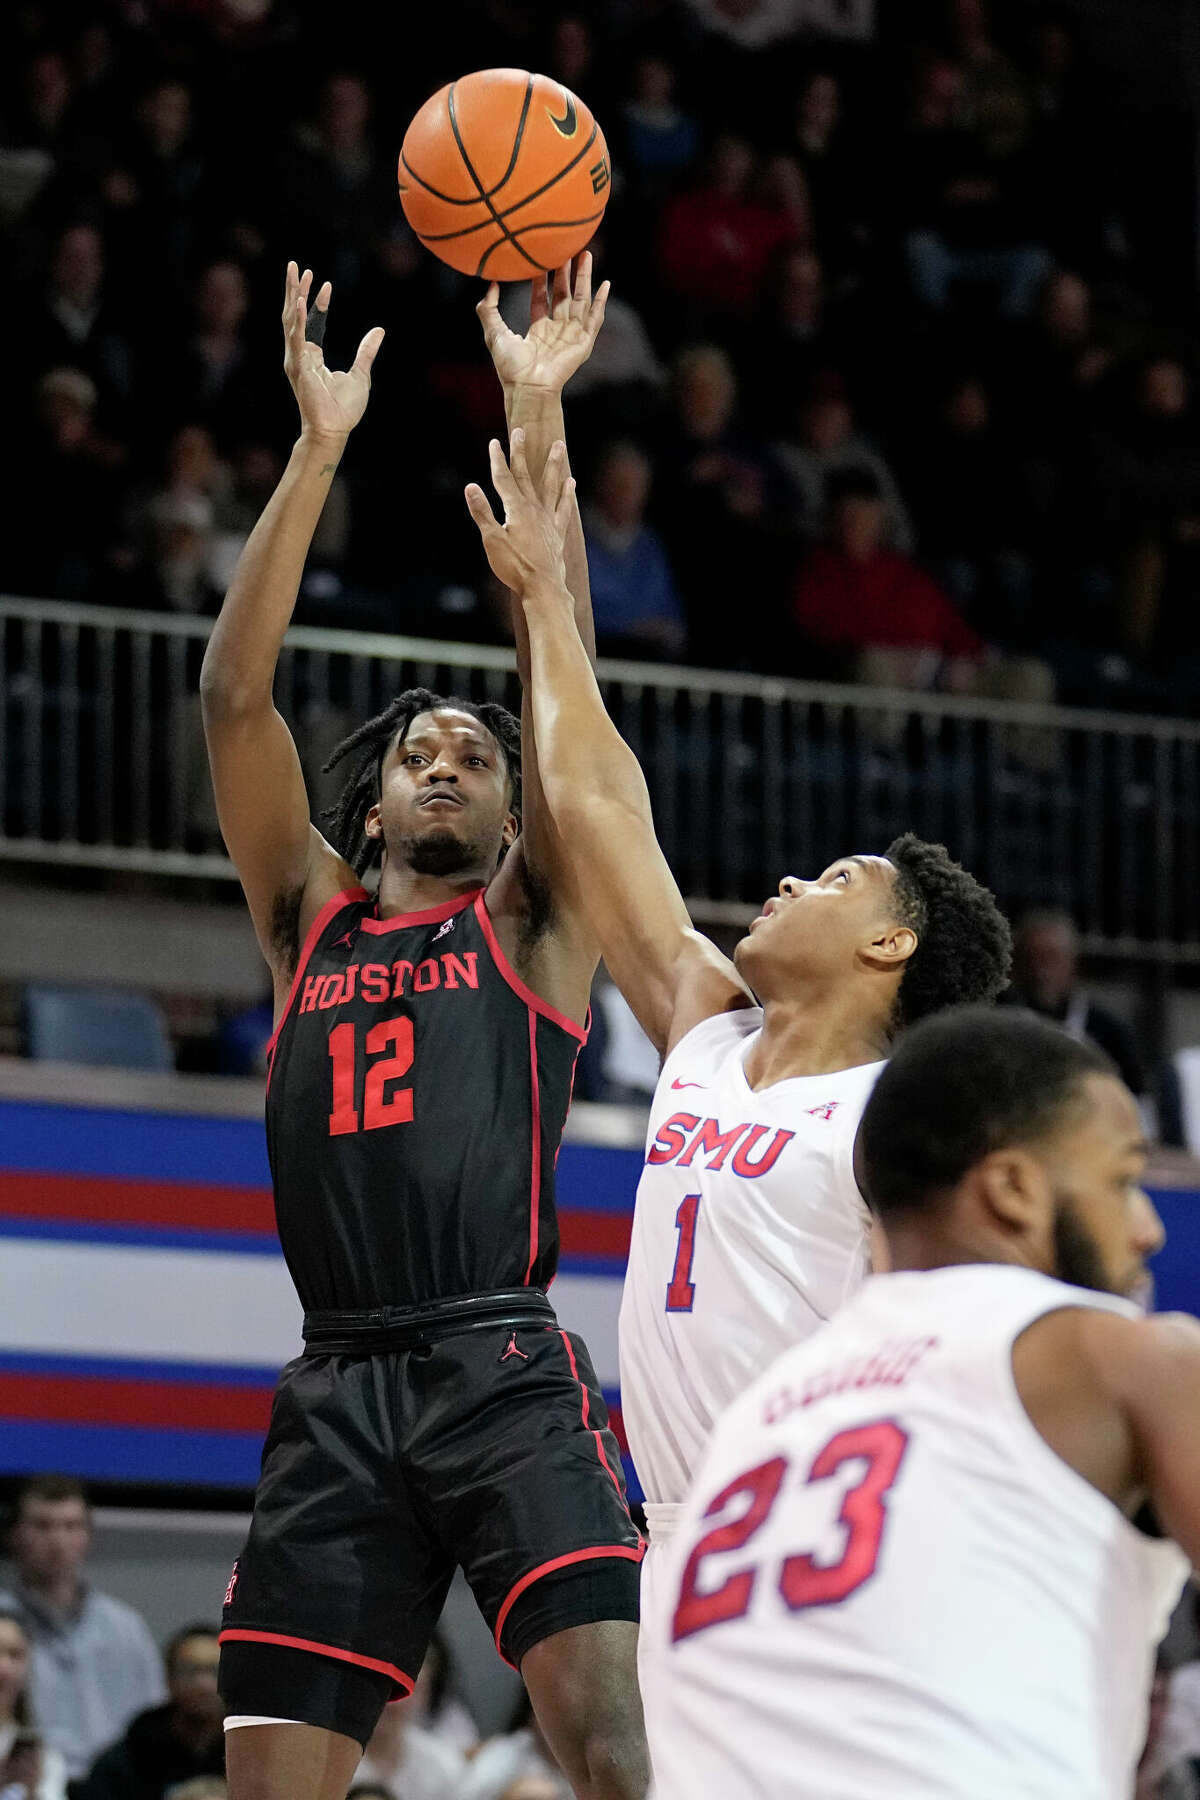 Houston's Tramon Mark (12) shoots over SMU's Zhuric Phelps (1) and Efe Odigie (23) during the first half of an NCAA college basketball game Thursday, Feb. 16, 2023, in Dallas. (AP Photo/Tony Gutierrez)